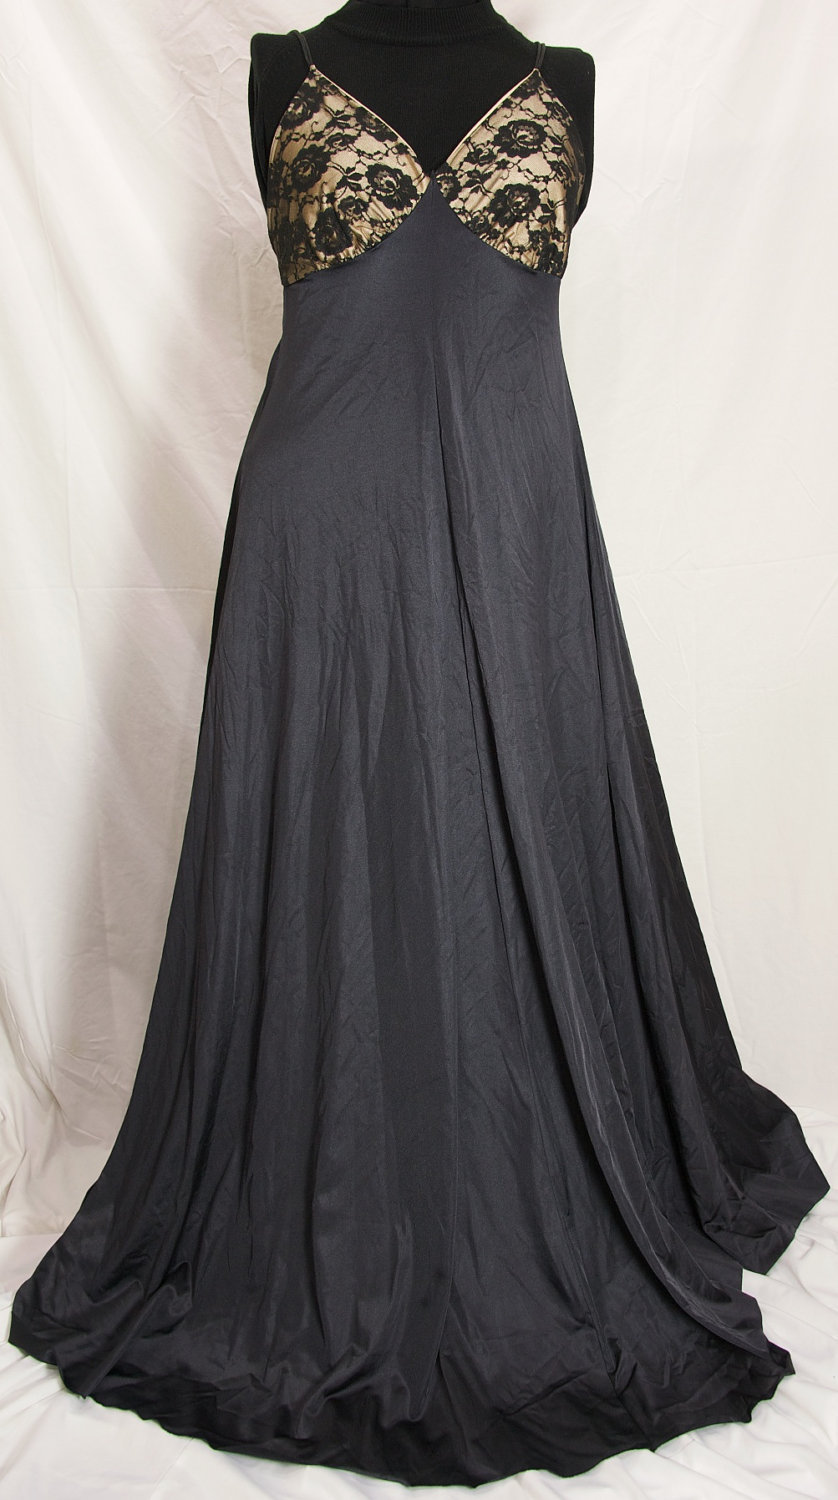 Vintage 1950s LeVoy's Black and Nude Lace Negligee with Matching Robe ...